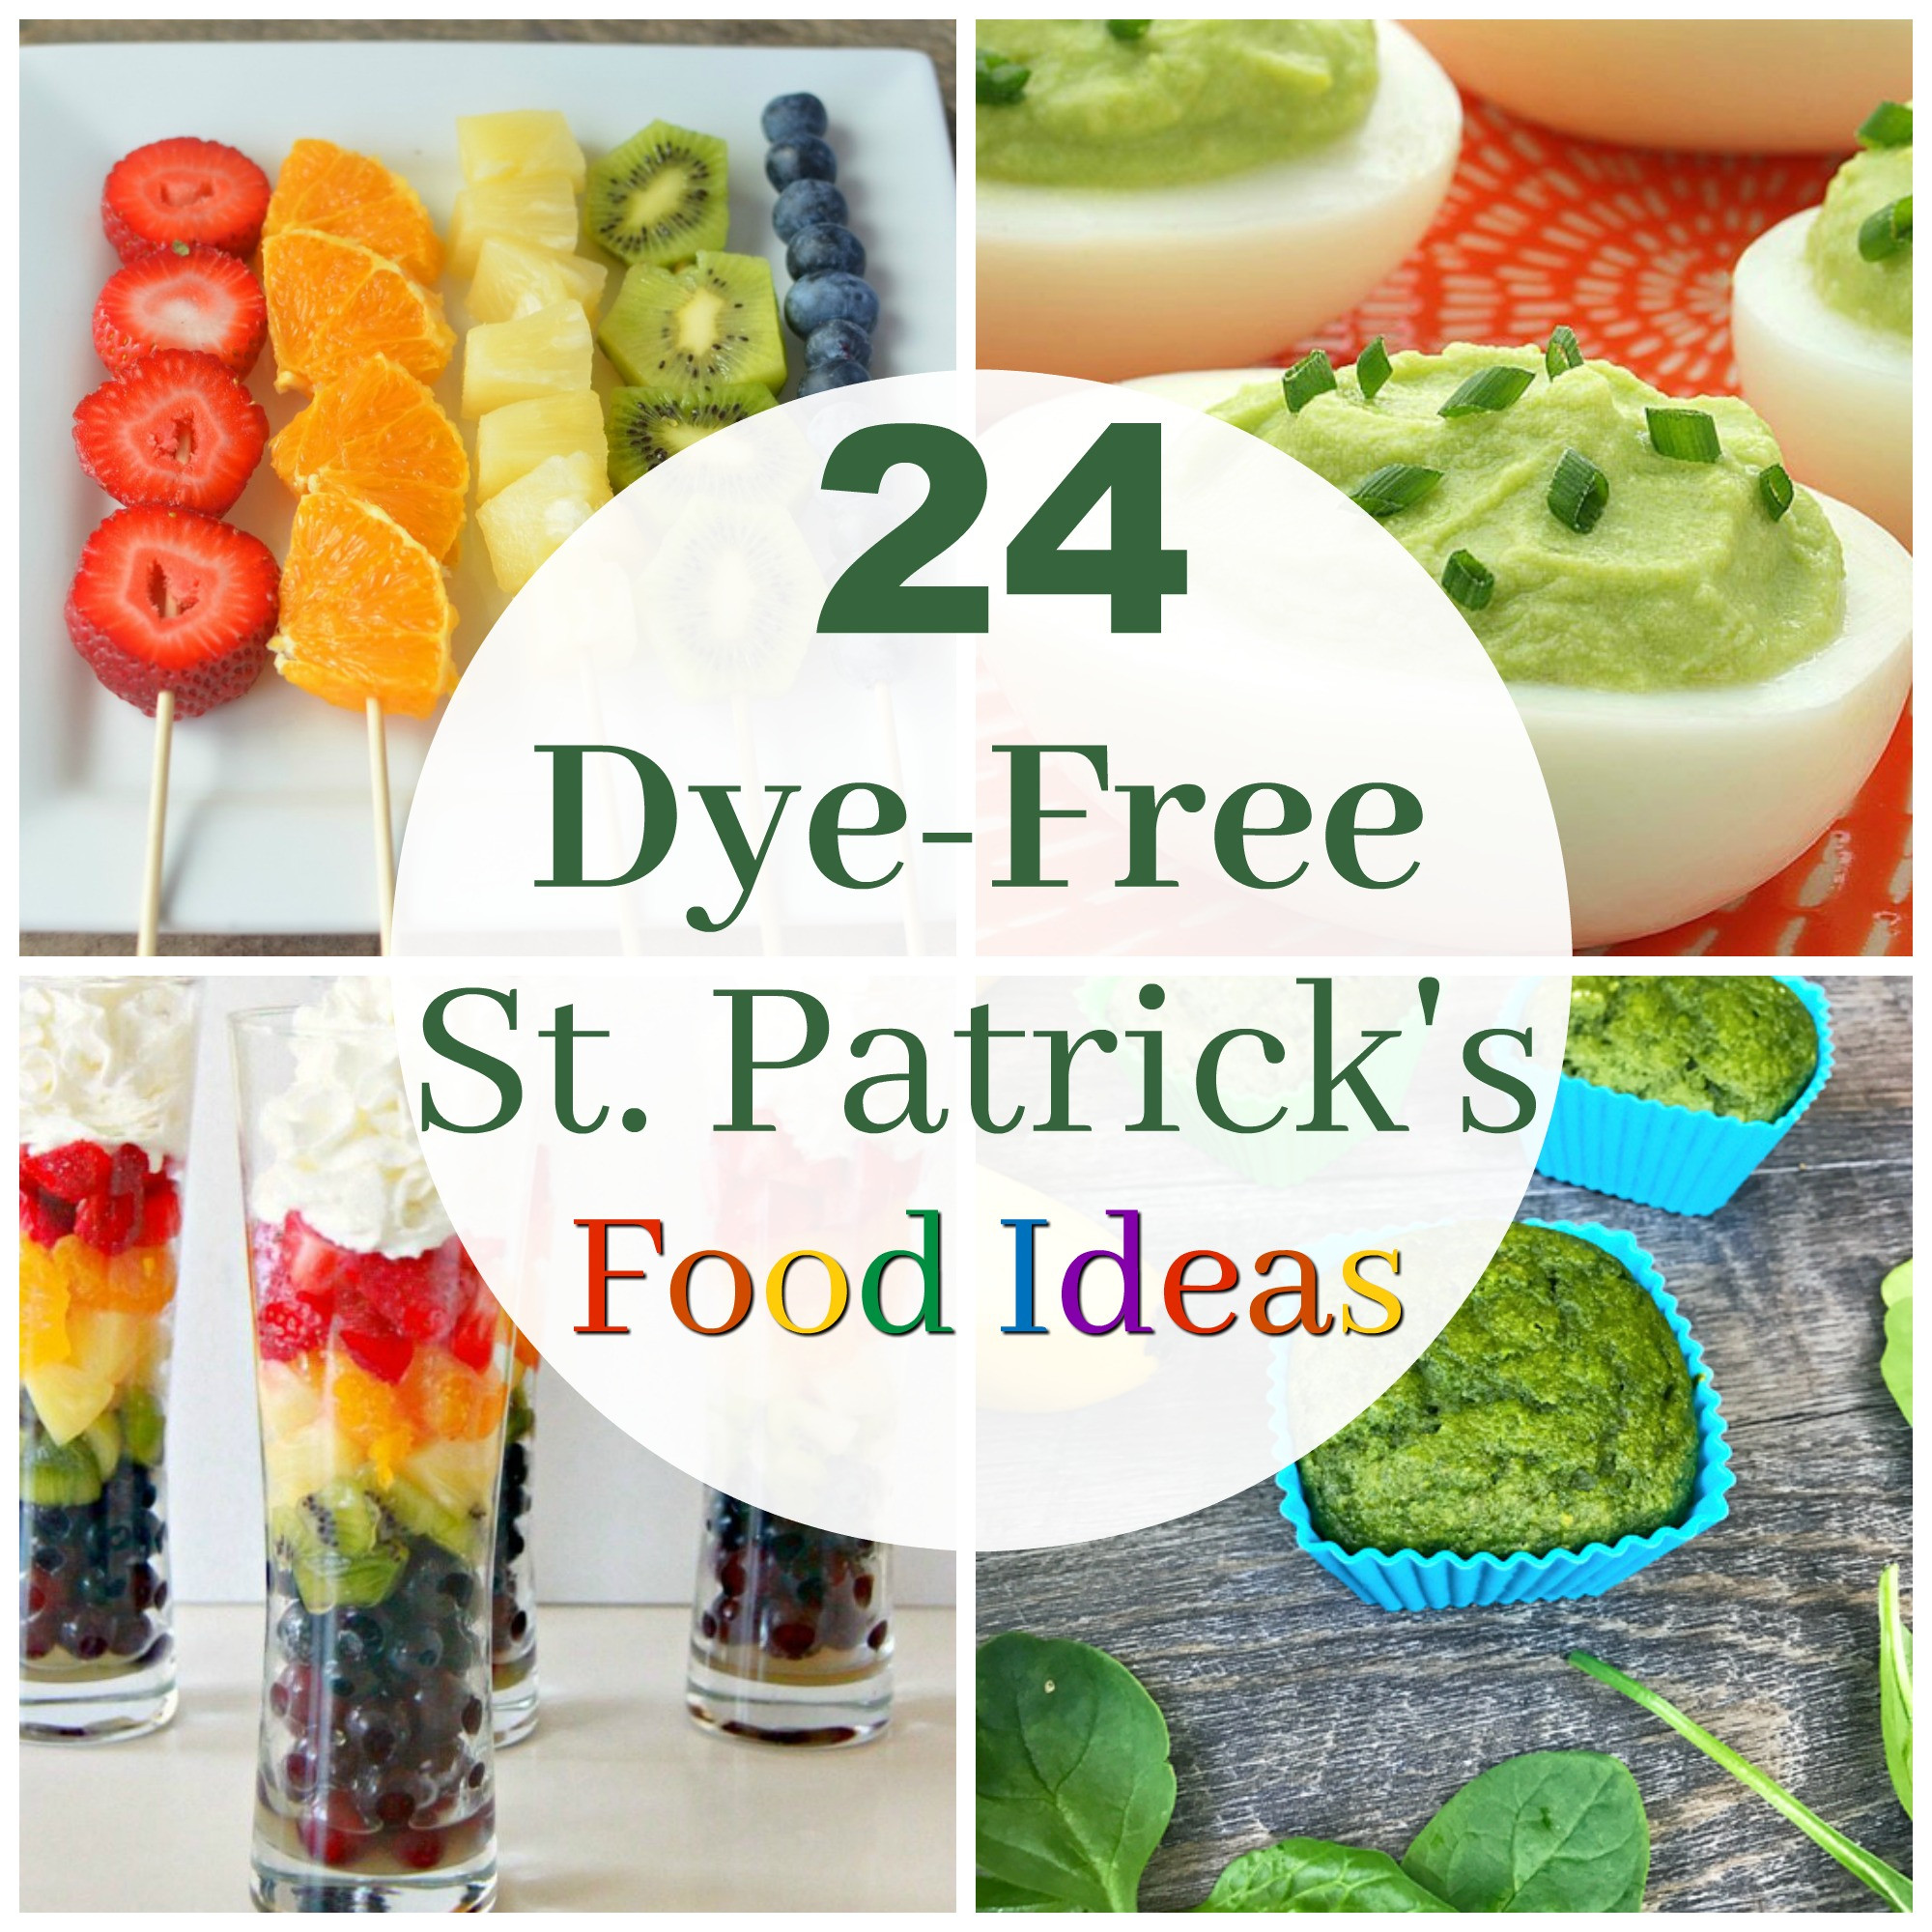 St. Patrick's Day Food Ideas
 24 Dye Free Ideas for Fun St Patrick s Day Food